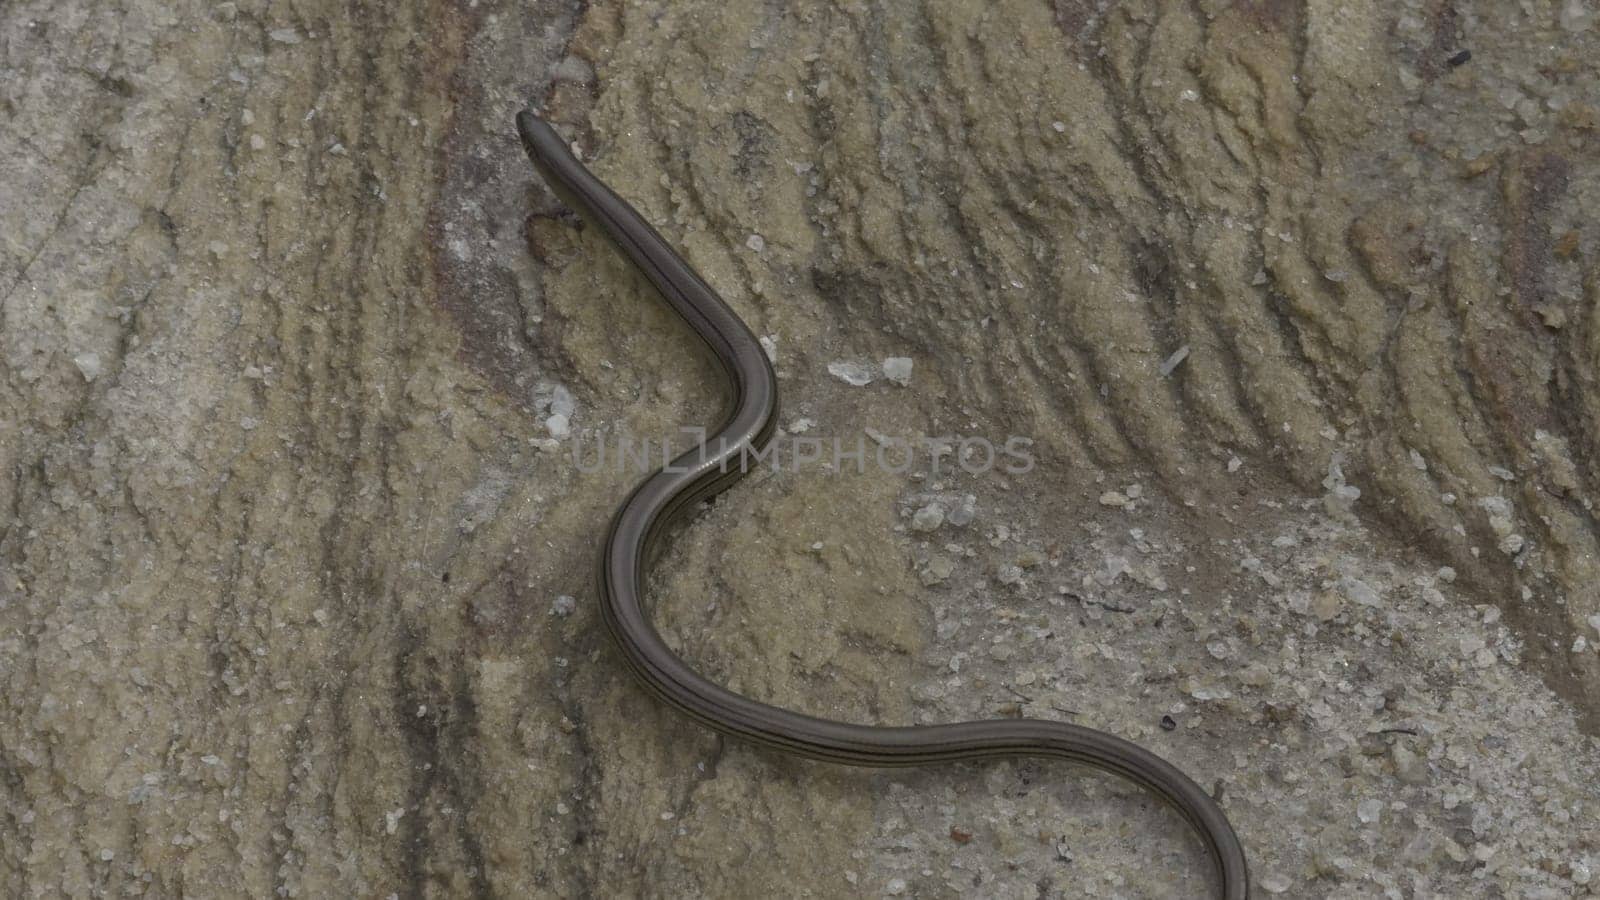 Slow-Motion Overhead View of Snake Slithering on a Rock by FerradalFCG